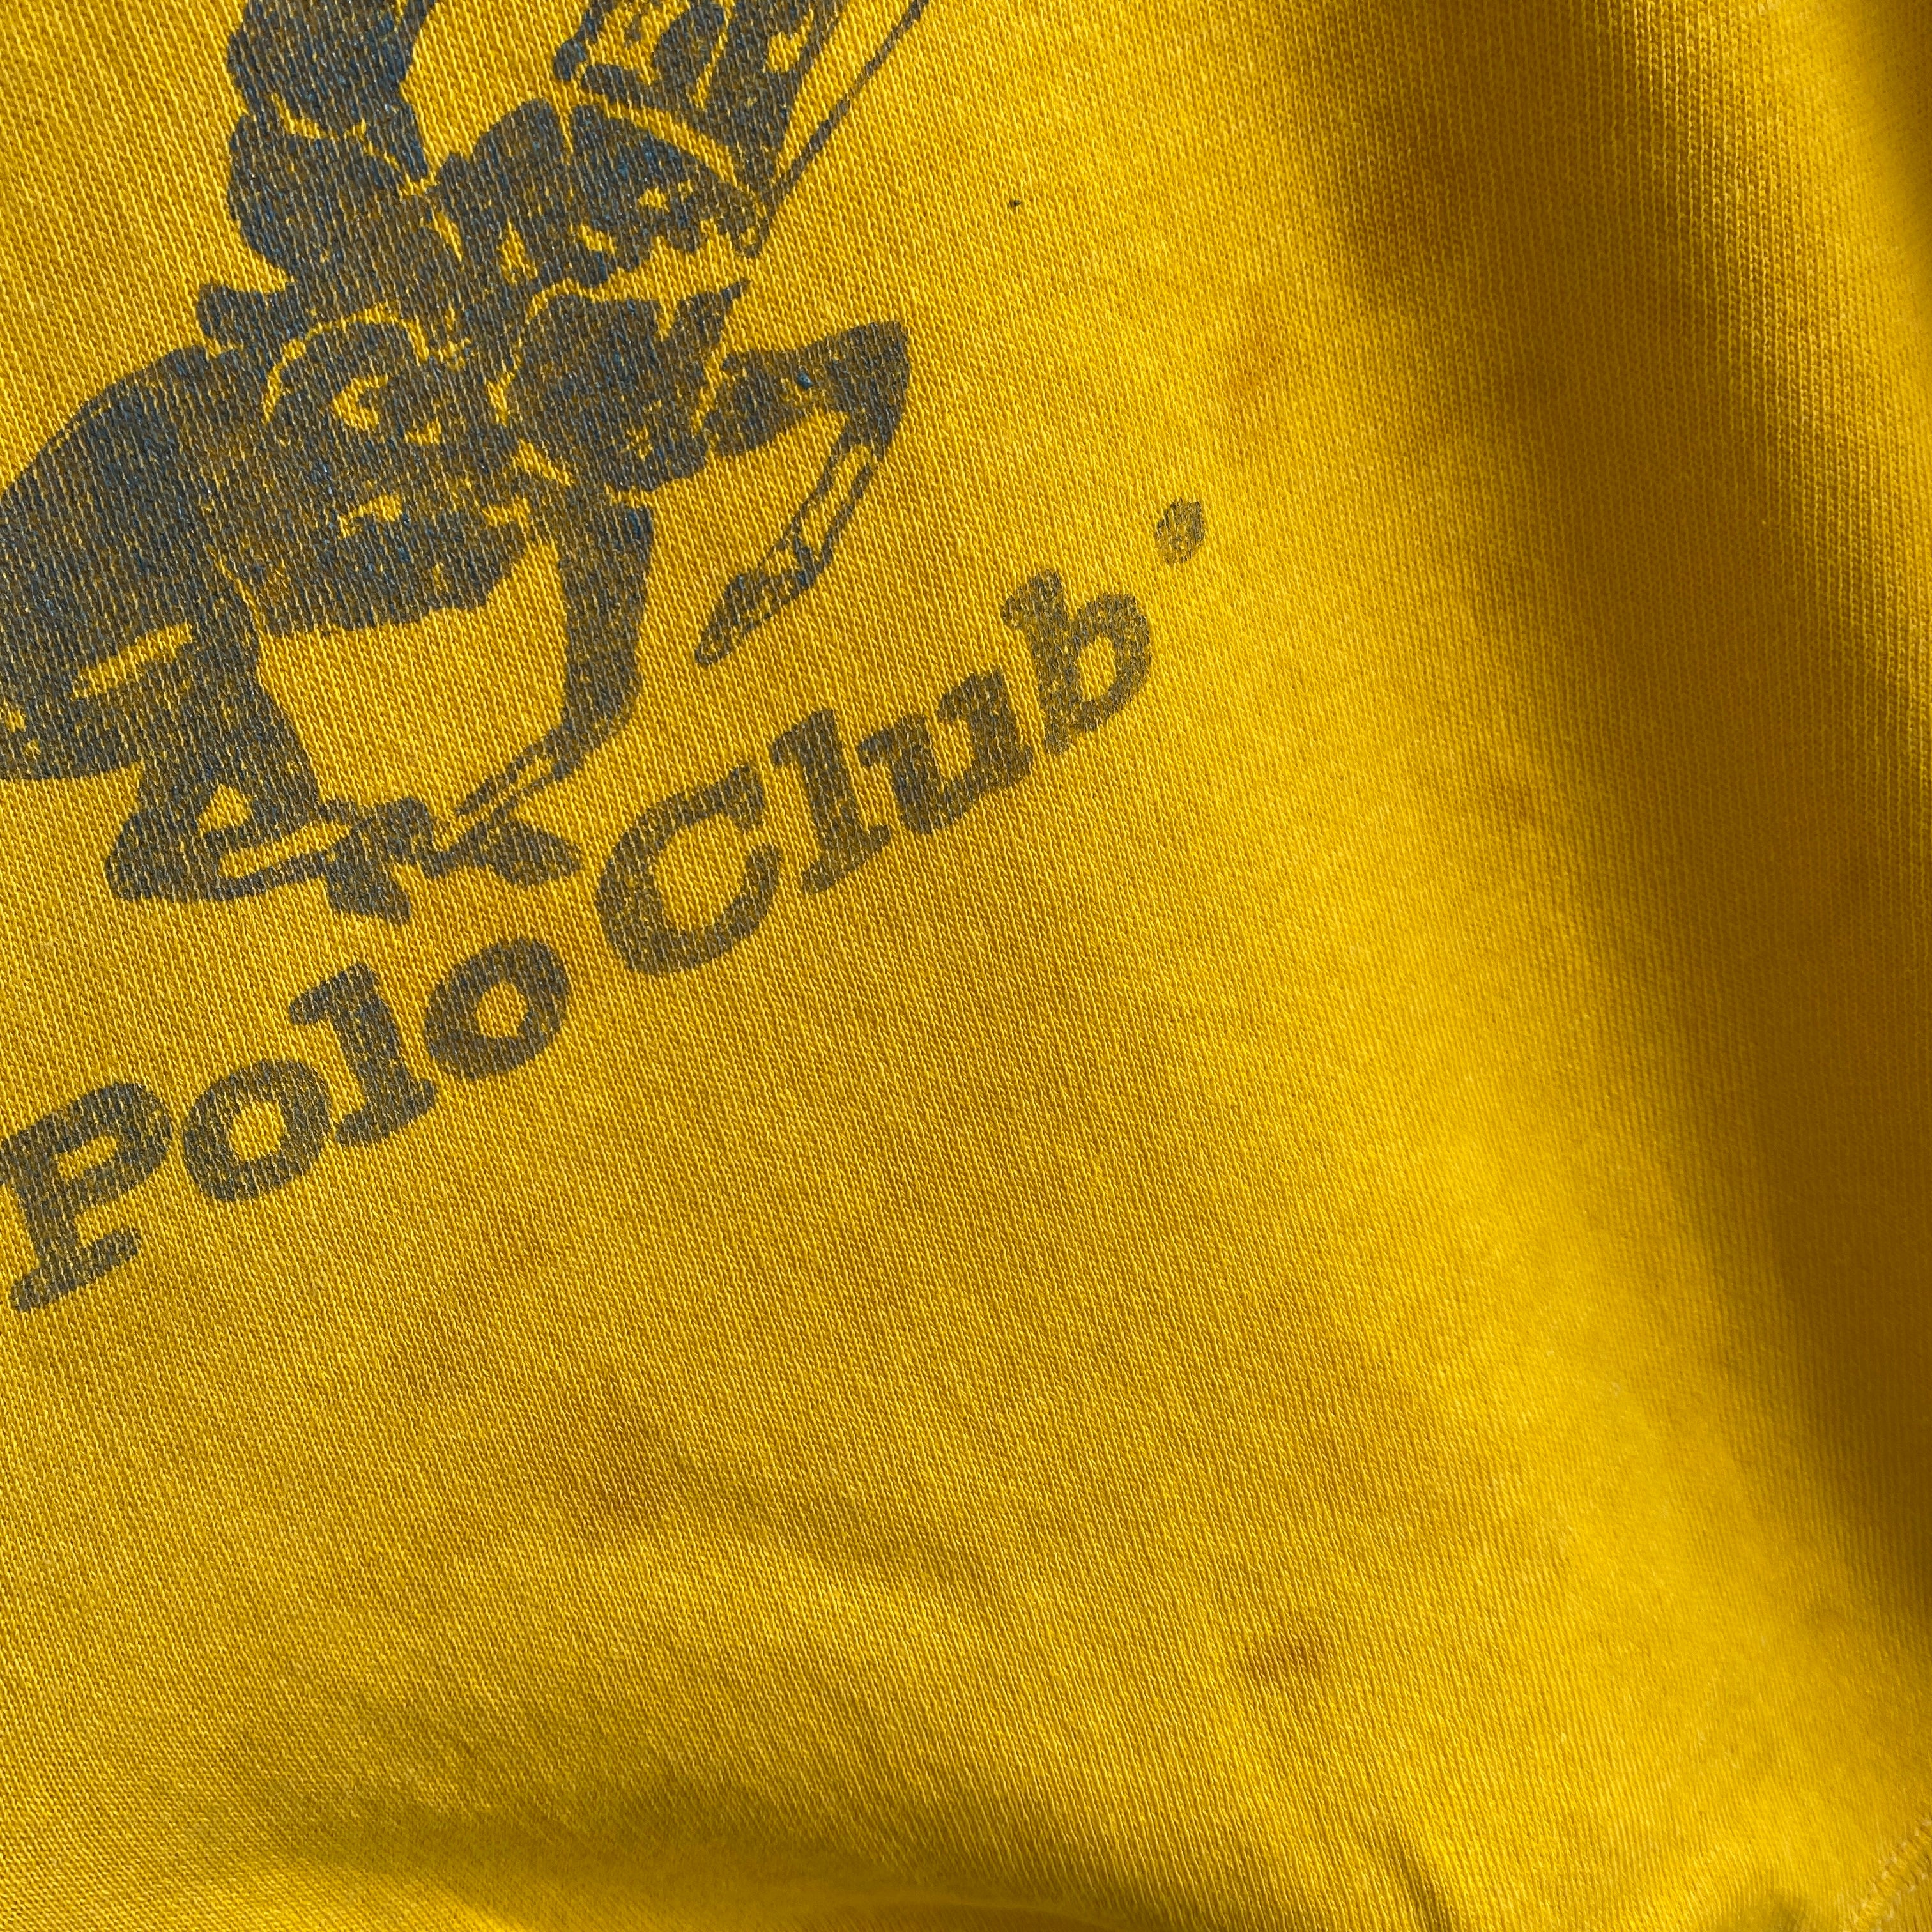 1980s Beverly Hills Polo Club SUPER Stained Soft and Slouchy Sweatshirt